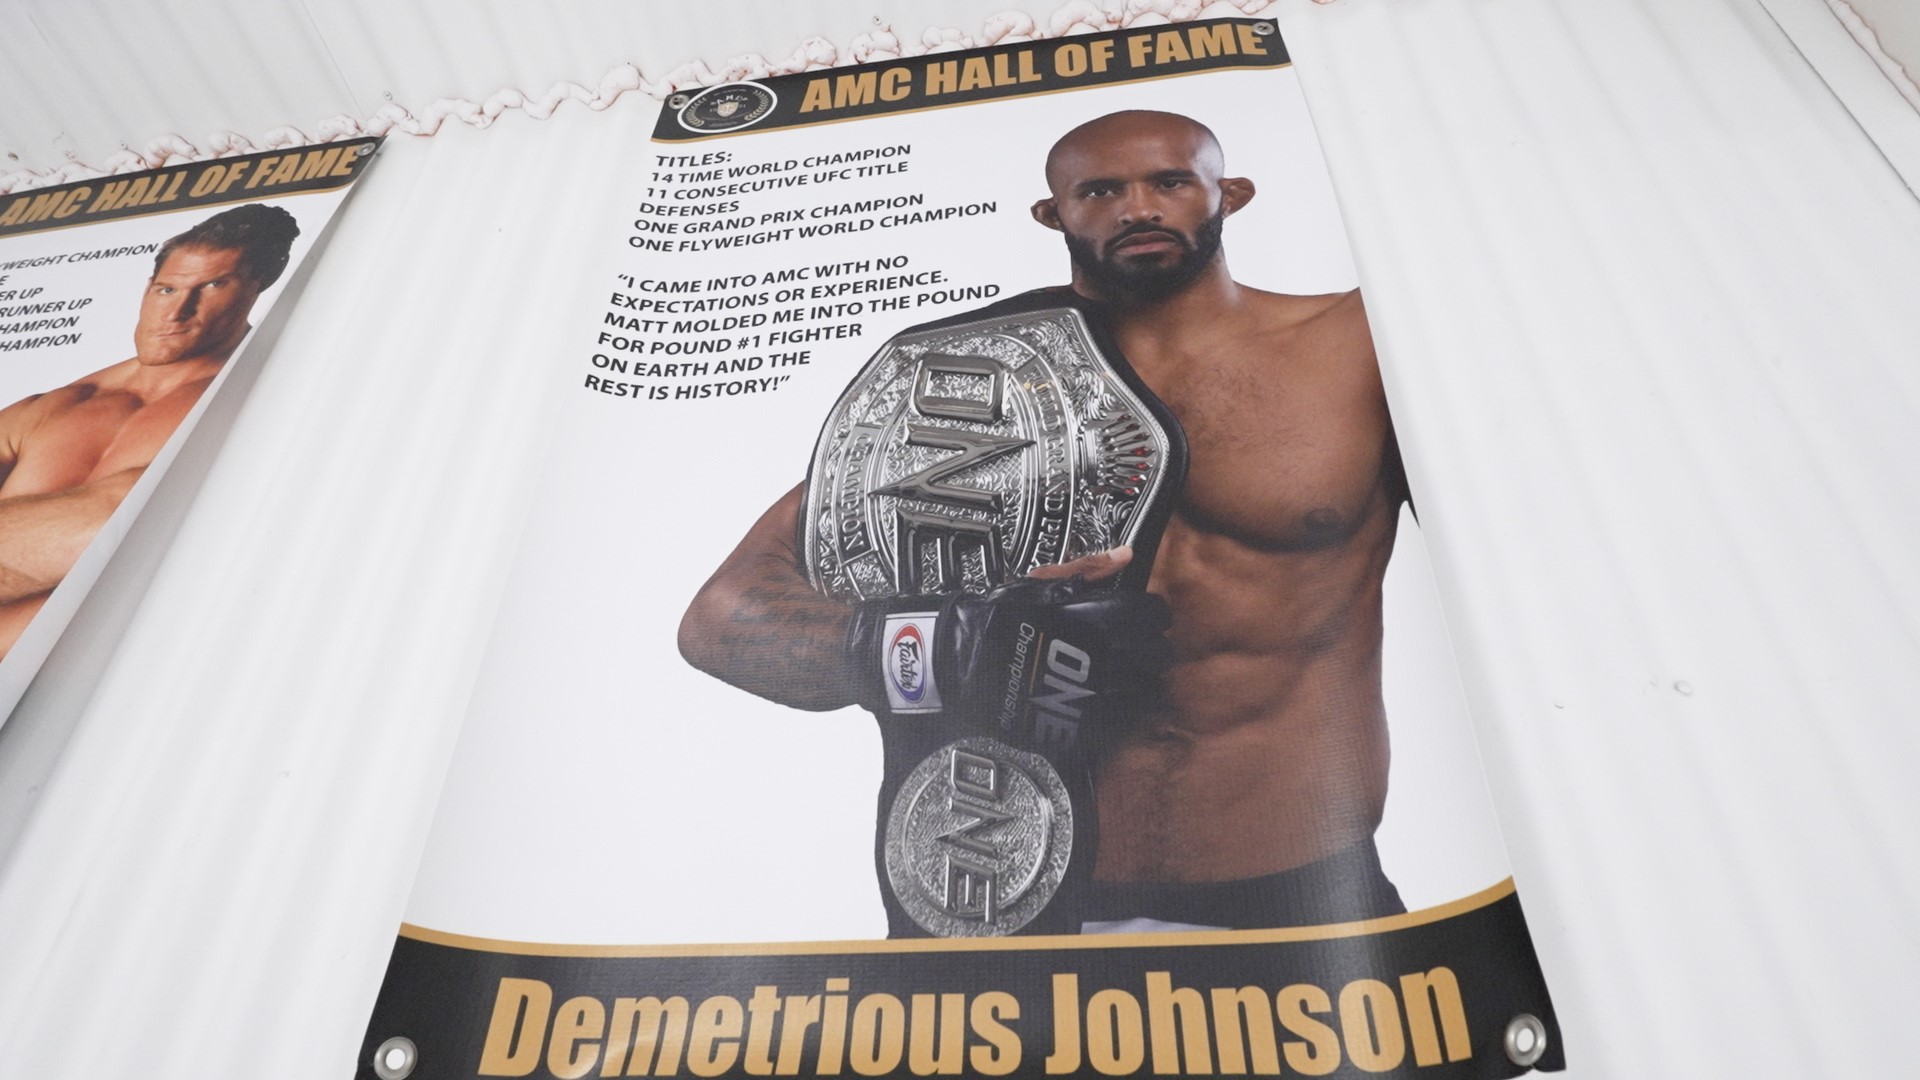 Demetrious “Mighty Mouse” Johnson is representing the Northwest on the big stage.